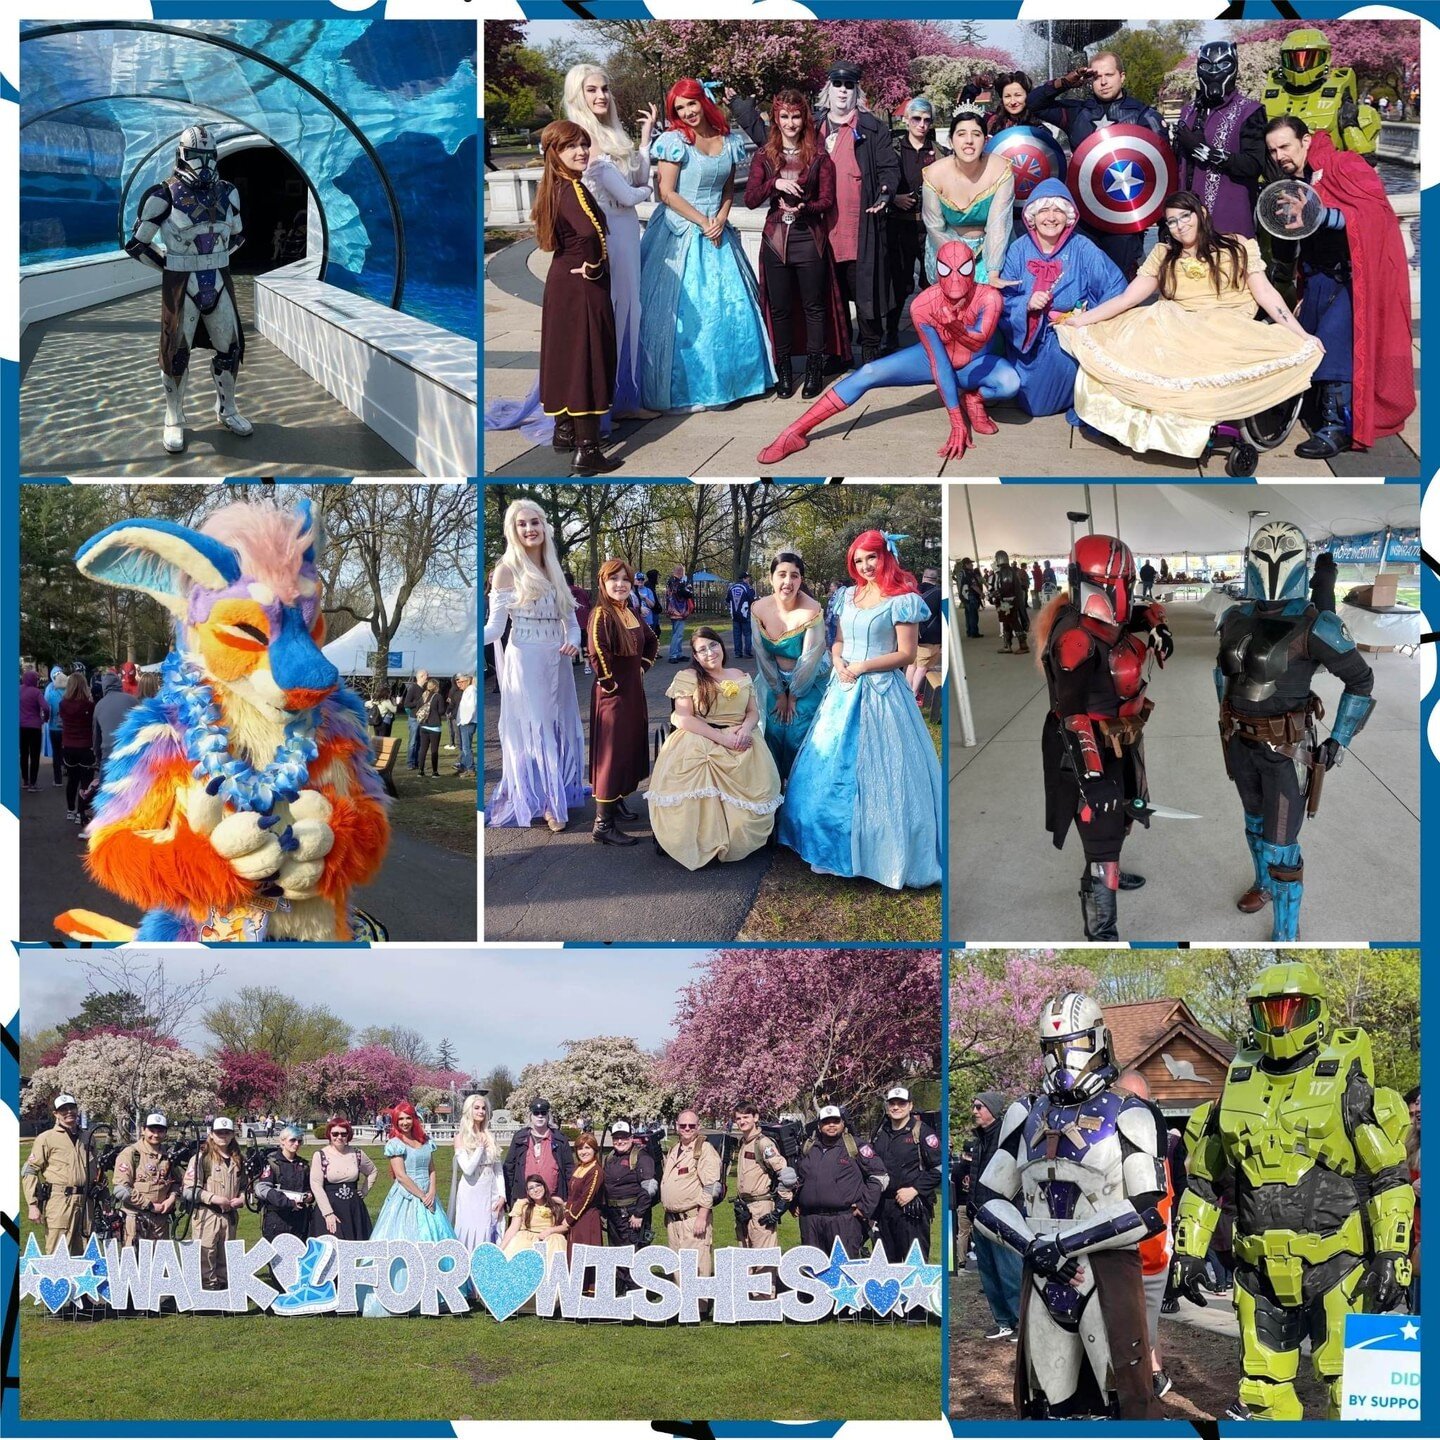 Yesterday we were overjoyed to be part of @makeawishmi's 25th Annual Walk for Wishes at the @detroitzoo, a fundraising event for the more than 800 Michigan children currently waiting for their wishes. We were lucky to spend time with wish kids, their